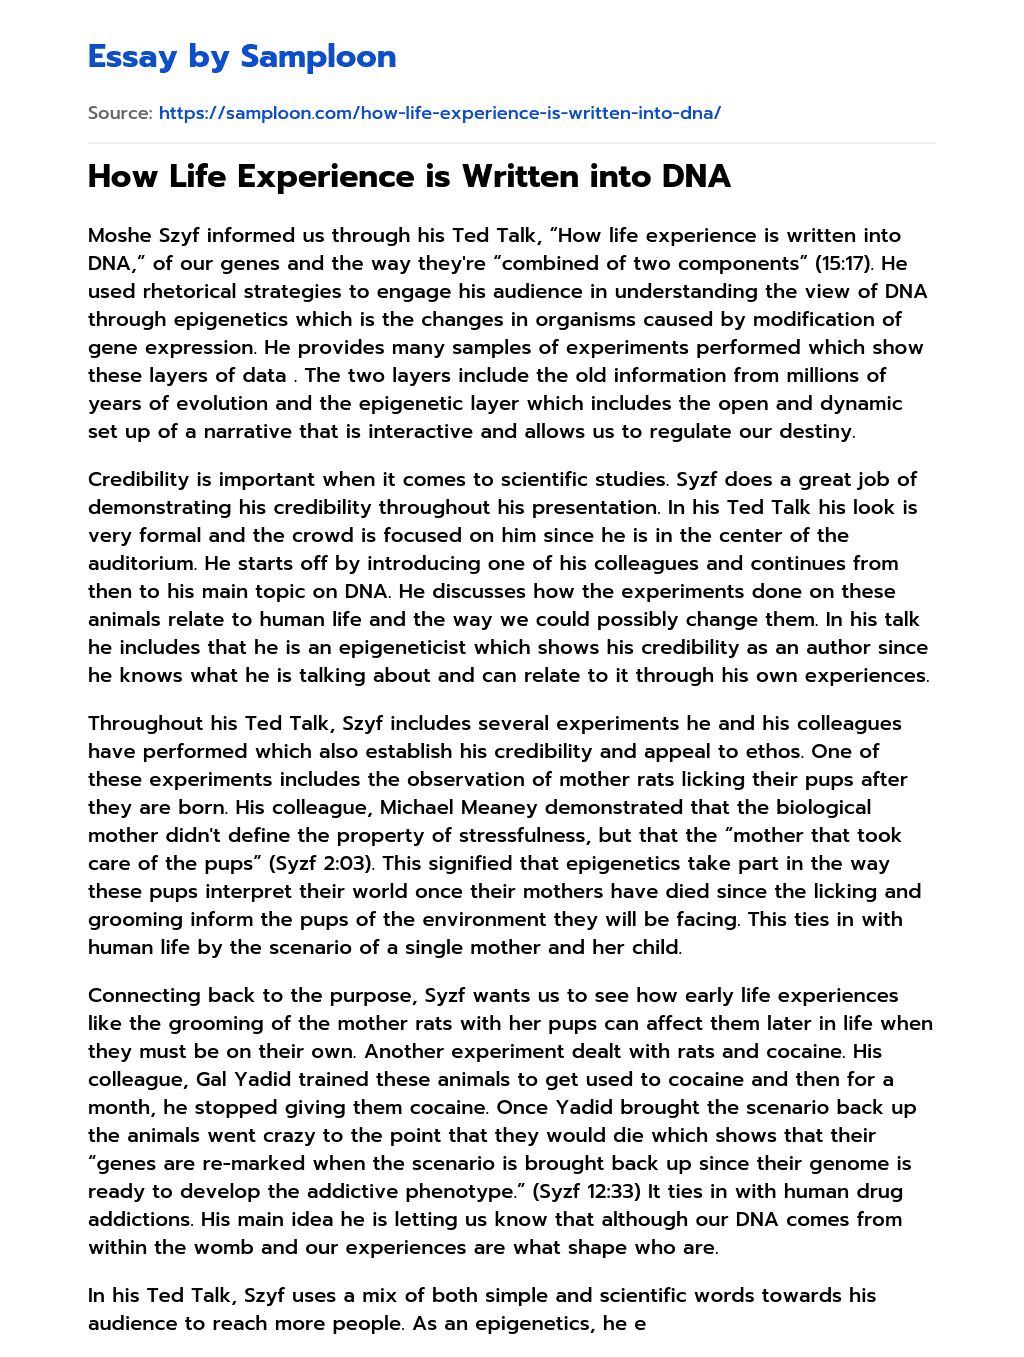 How Life Experience is Written into DNA essay